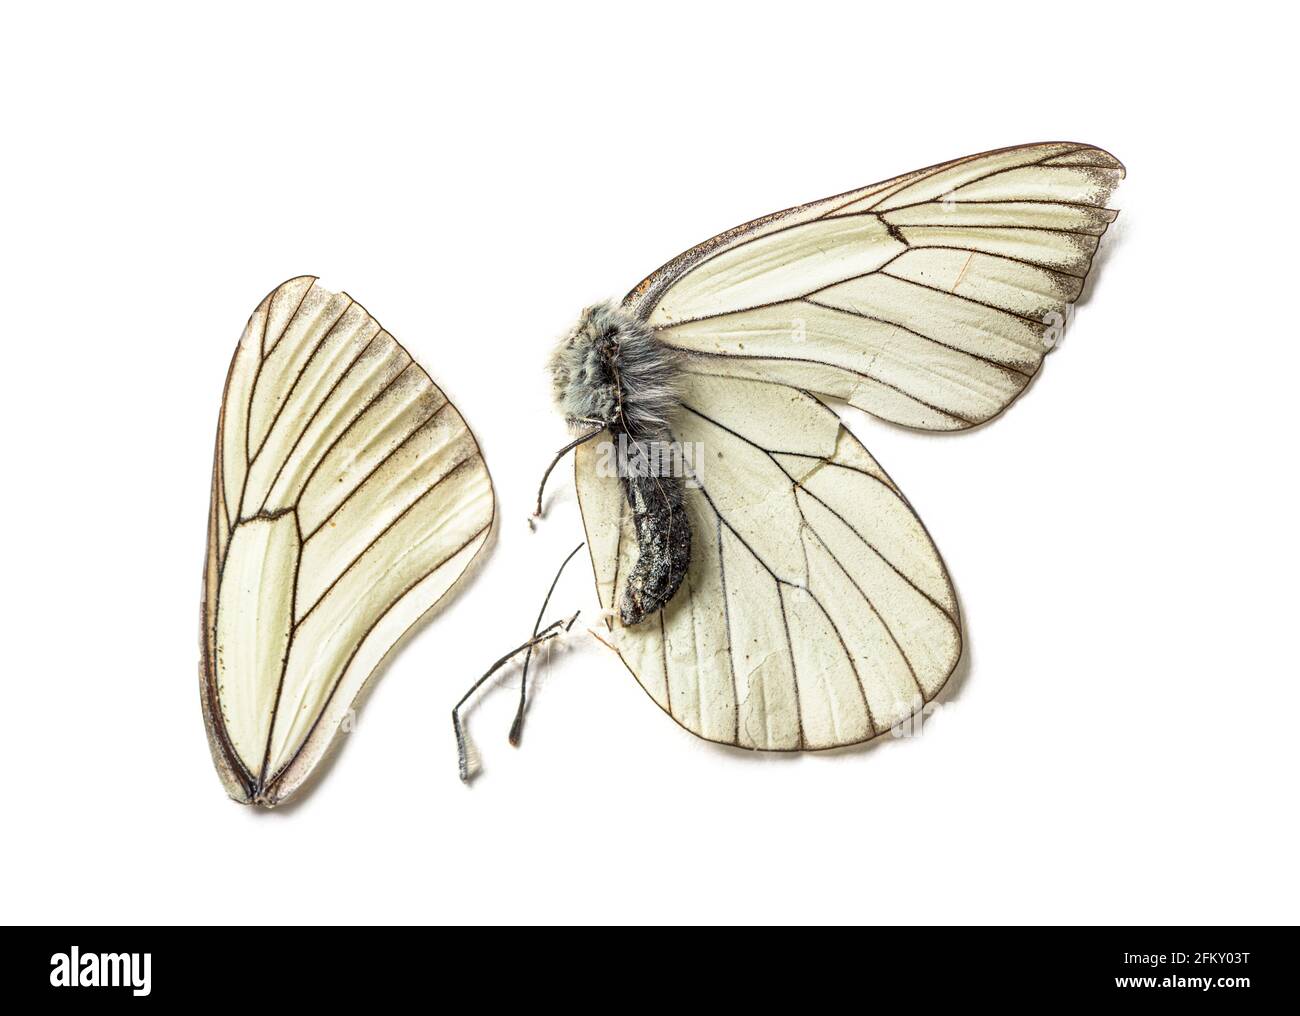 Dead black and white butterfly In state of decomposition Stock Photo